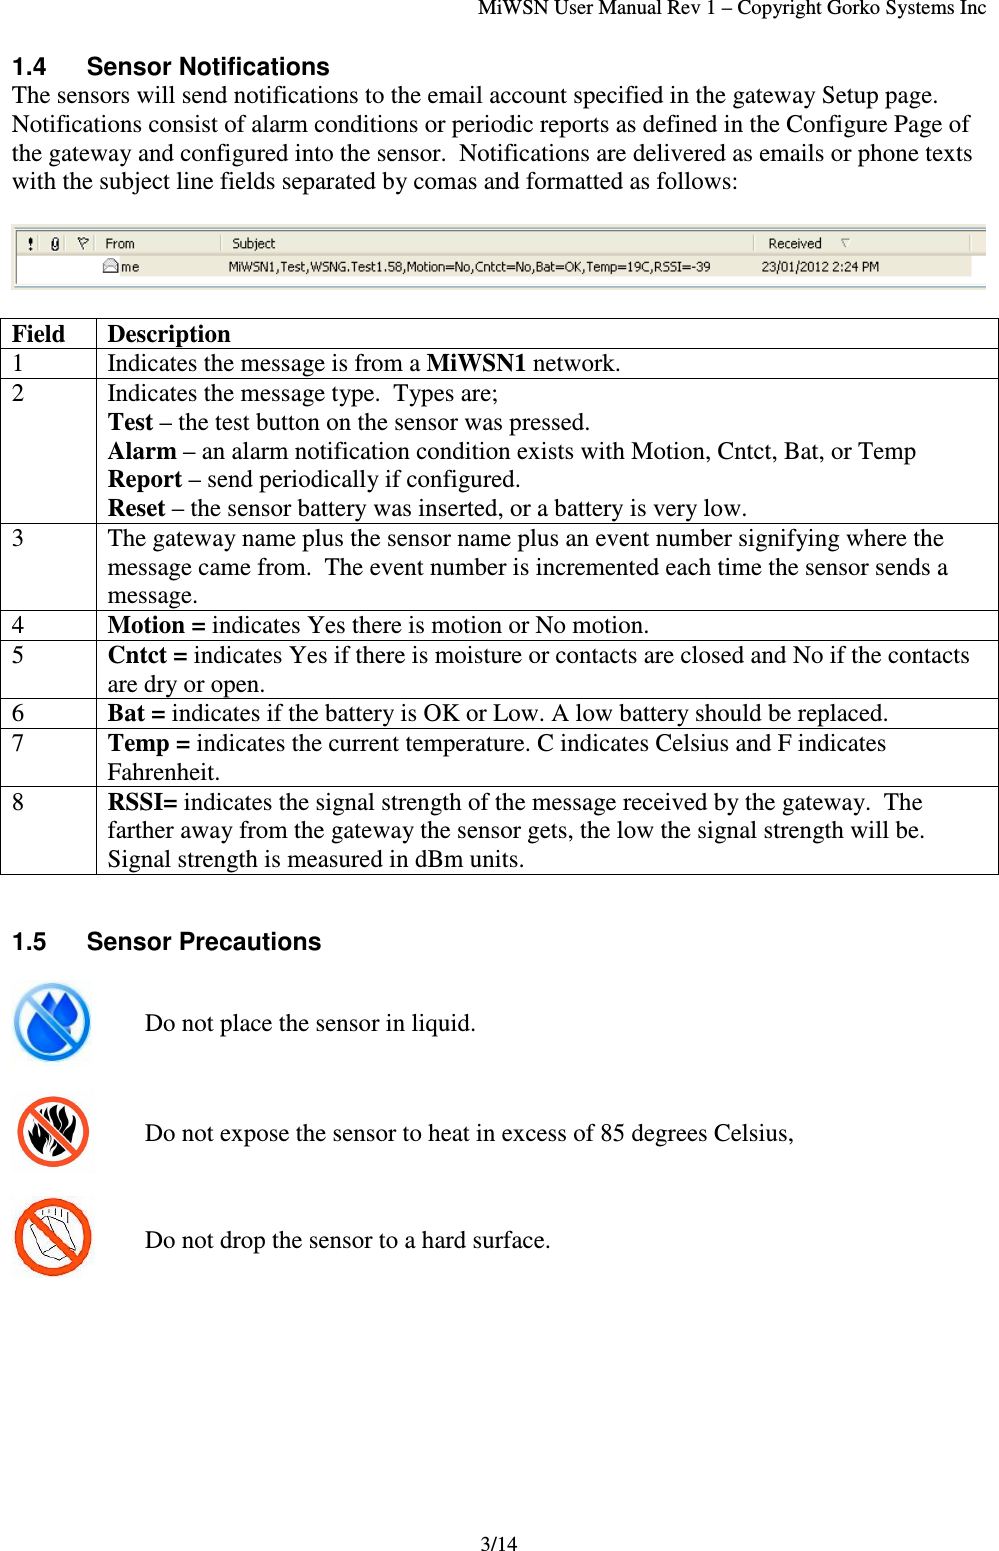 MiWSN User Manual Rev 1 – Copyright Gorko Systems Inc3/141.4  Sensor NotificationsThe sensors will send notifications to the email account specified in the gateway Setup page.Notifications consist of alarm conditions or periodic reports as defined in the Configure Page ofthe gateway and configured into the sensor.  Notifications are delivered as emails or phone textswith the subject line fields separated by comas and formatted as follows:Field Description1 Indicates the message is from a MiWSN1 network.2 Indicates the message type.  Types are;Test – the test button on the sensor was pressed.Alarm – an alarm notification condition exists with Motion, Cntct, Bat, or TempReport – send periodically if configured.Reset – the sensor battery was inserted, or a battery is very low.3 The gateway name plus the sensor name plus an event number signifying where themessage came from.  The event number is incremented each time the sensor sends amessage.4Motion = indicates Yes there is motion or No motion.5Cntct = indicates Yes if there is moisture or contacts are closed and No if the contactsare dry or open.6Bat = indicates if the battery is OK or Low. A low battery should be replaced.7Temp = indicates the current temperature. C indicates Celsius and F indicatesFahrenheit.8RSSI= indicates the signal strength of the message received by the gateway.  Thefarther away from the gateway the sensor gets, the low the signal strength will be.Signal strength is measured in dBm units.1.5 Sensor PrecautionsDo not place the sensor in liquid.Do not expose the sensor to heat in excess of 85 degrees Celsius,Do not drop the sensor to a hard surface.